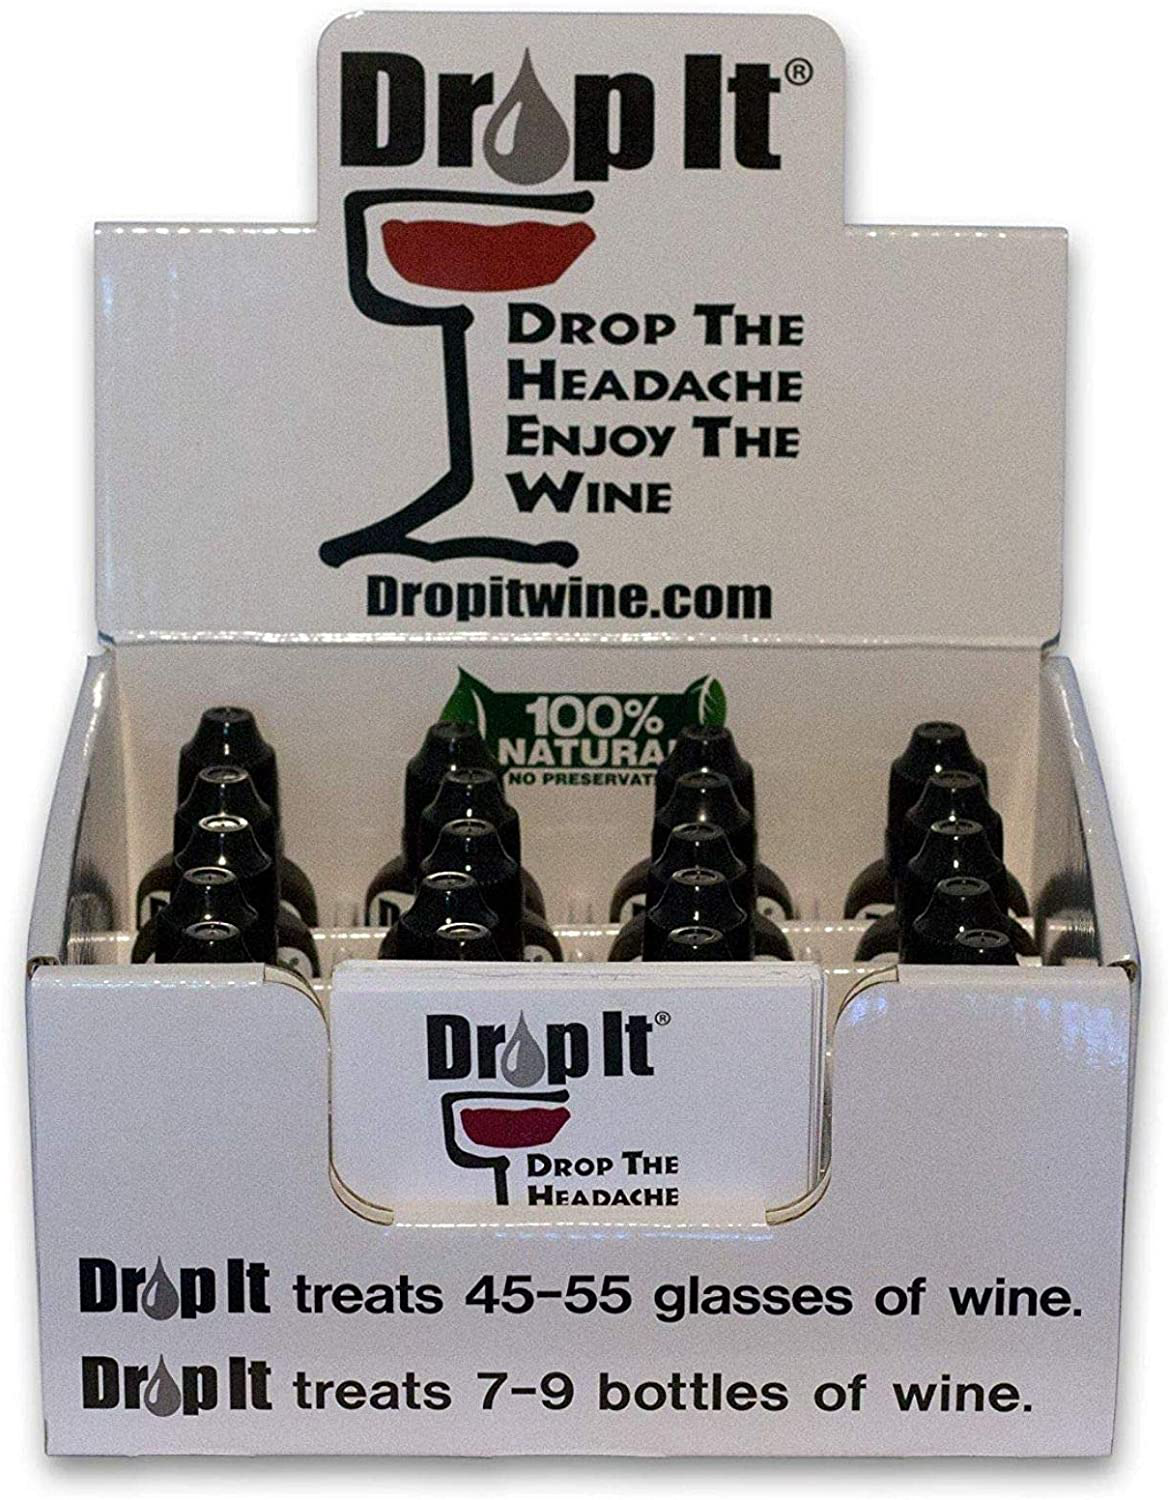 Drop It Wine Drops, 1 Pack - Only Product to Naturally Remove Both Wine Sulfites and Wine Tannins - Can Eliminate Wine Headaches, Wine Allergies and Histamines in 20 Seconds - a Wine Wand Alternative